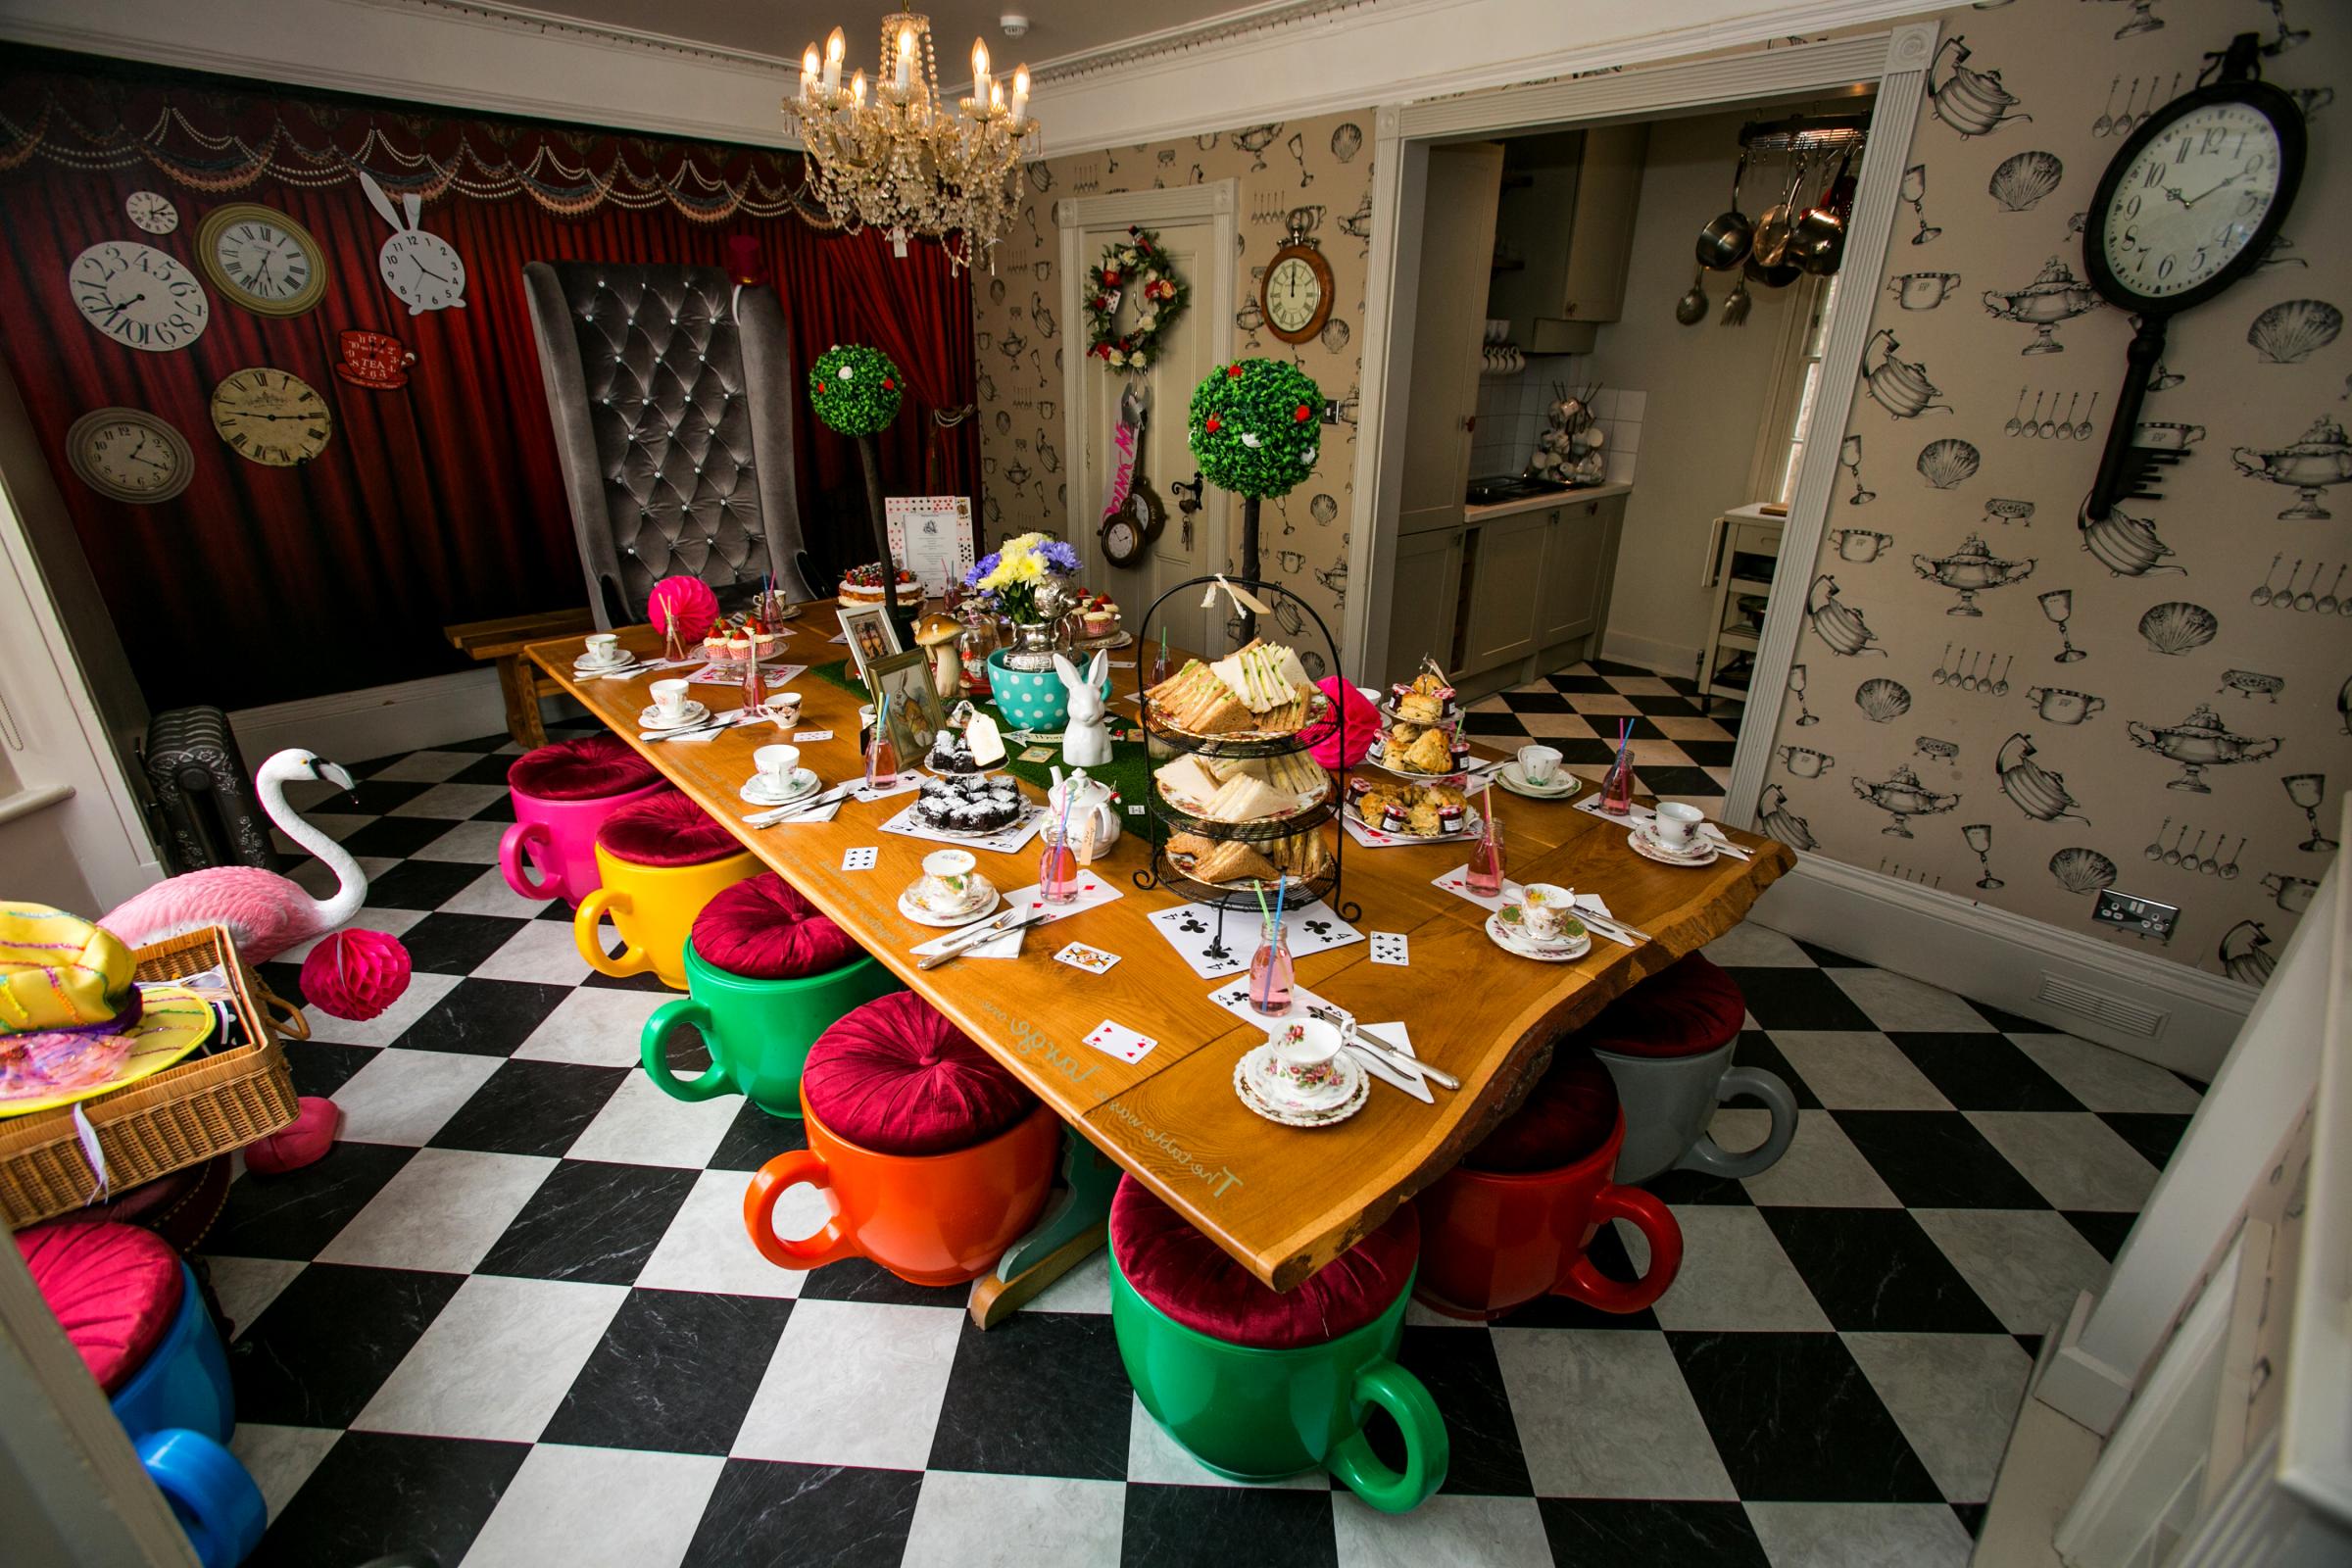 Inside one of the Alice in Wonderland themed homes. Picture: SWNS